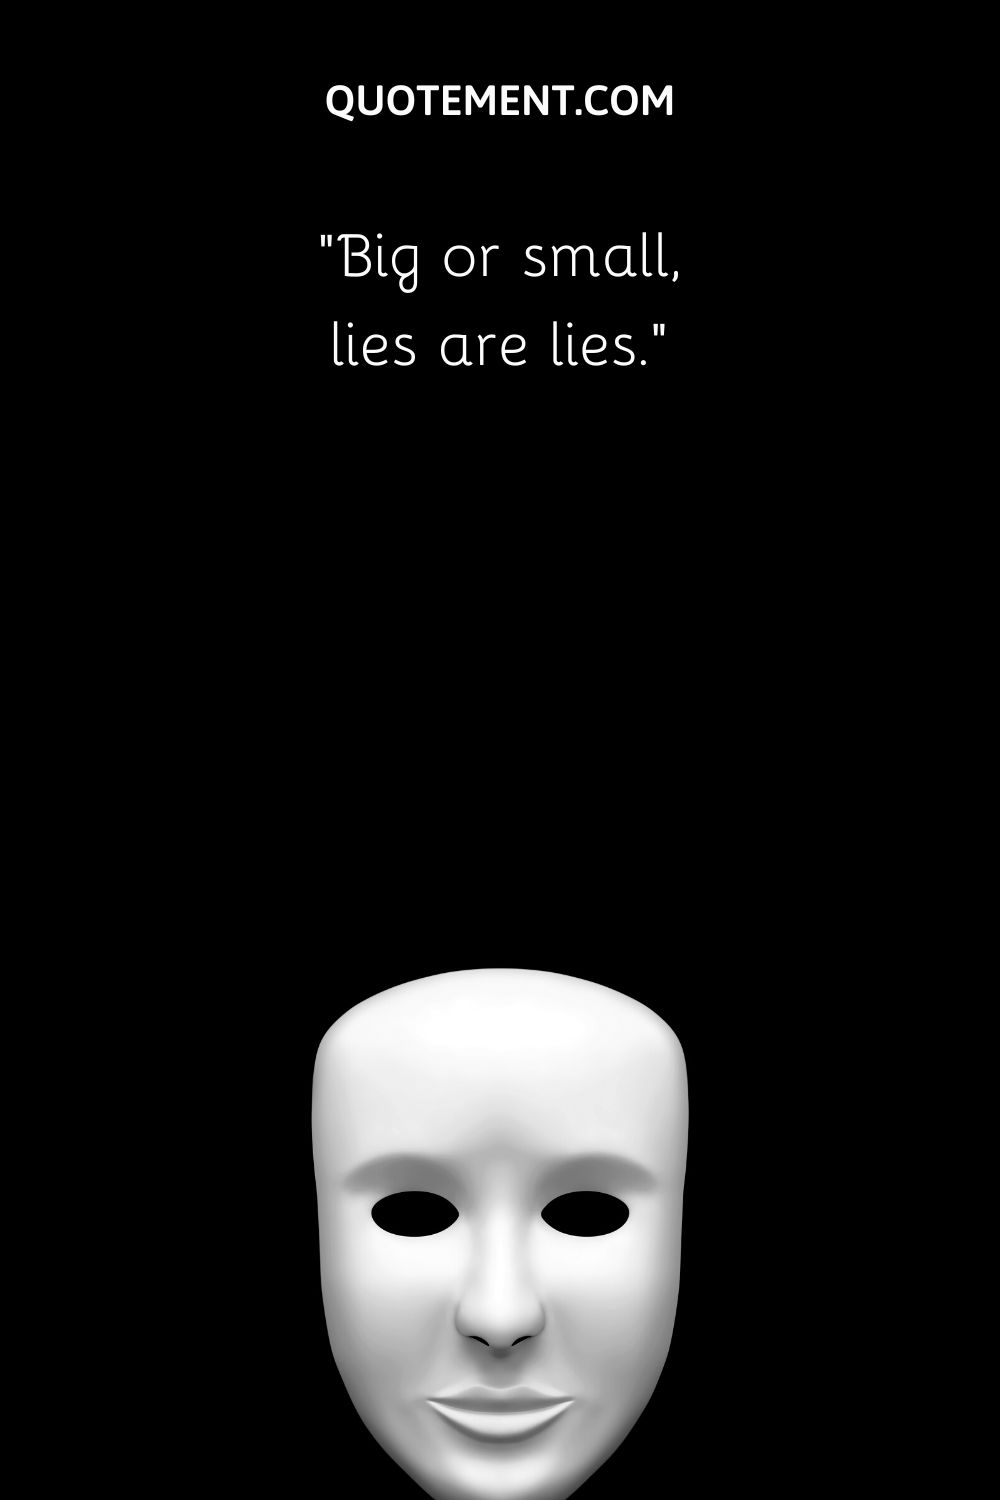 Big or small, lies are lies